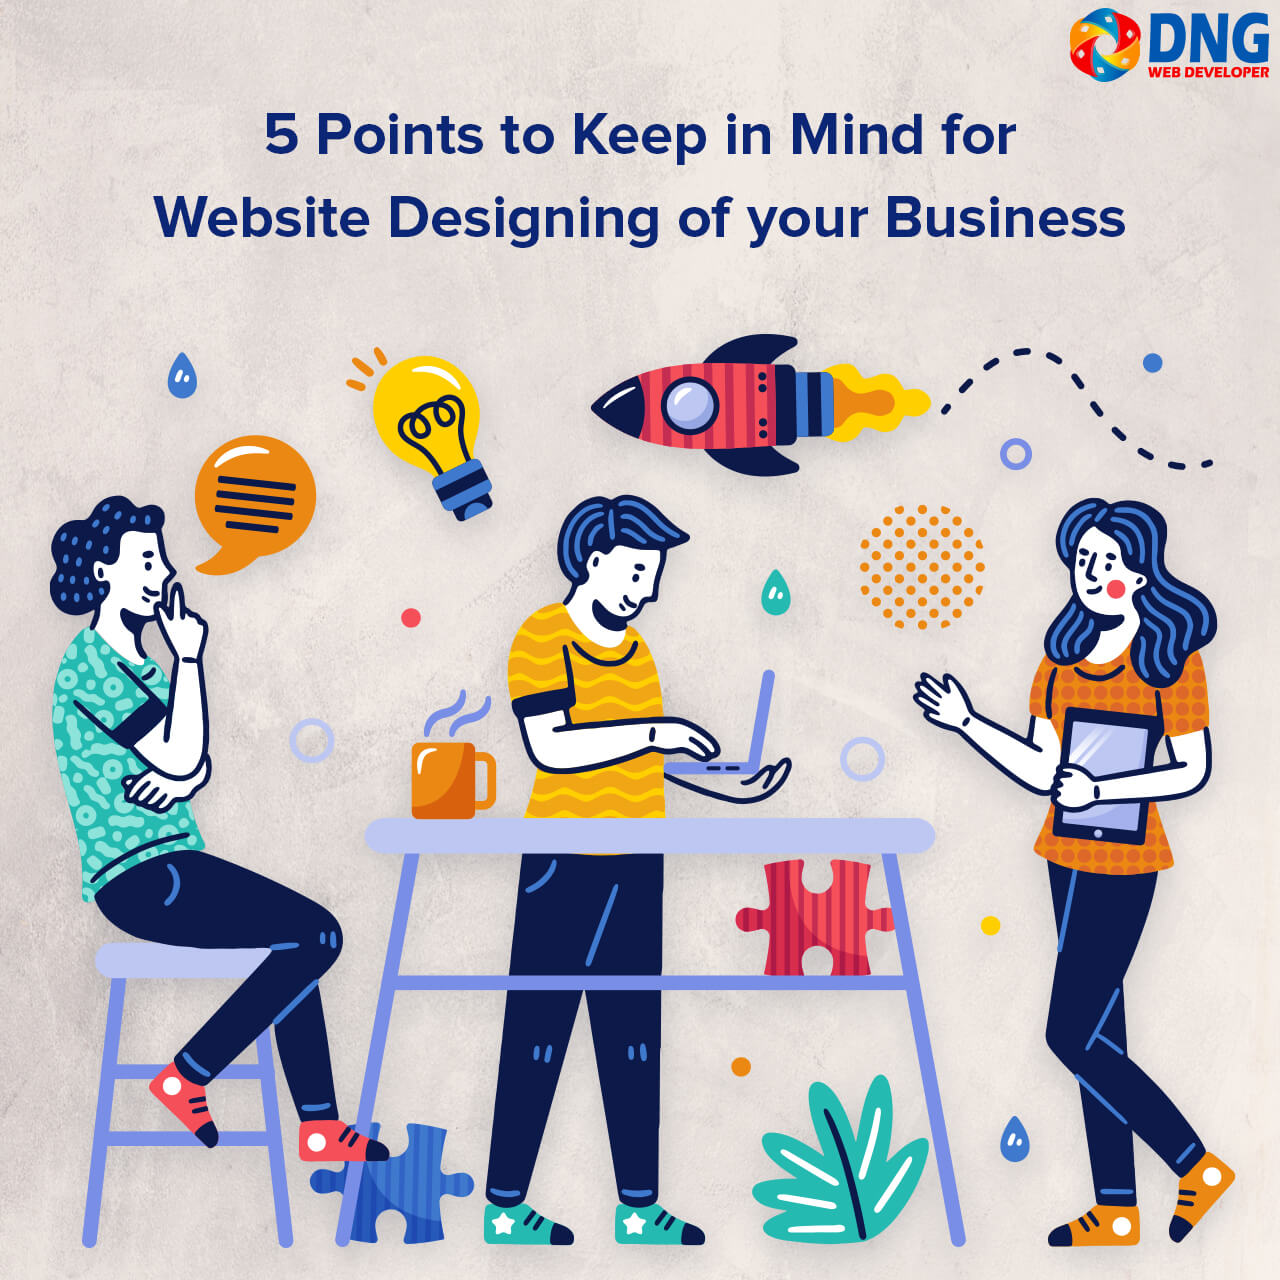 Point to keep in mind for website designing